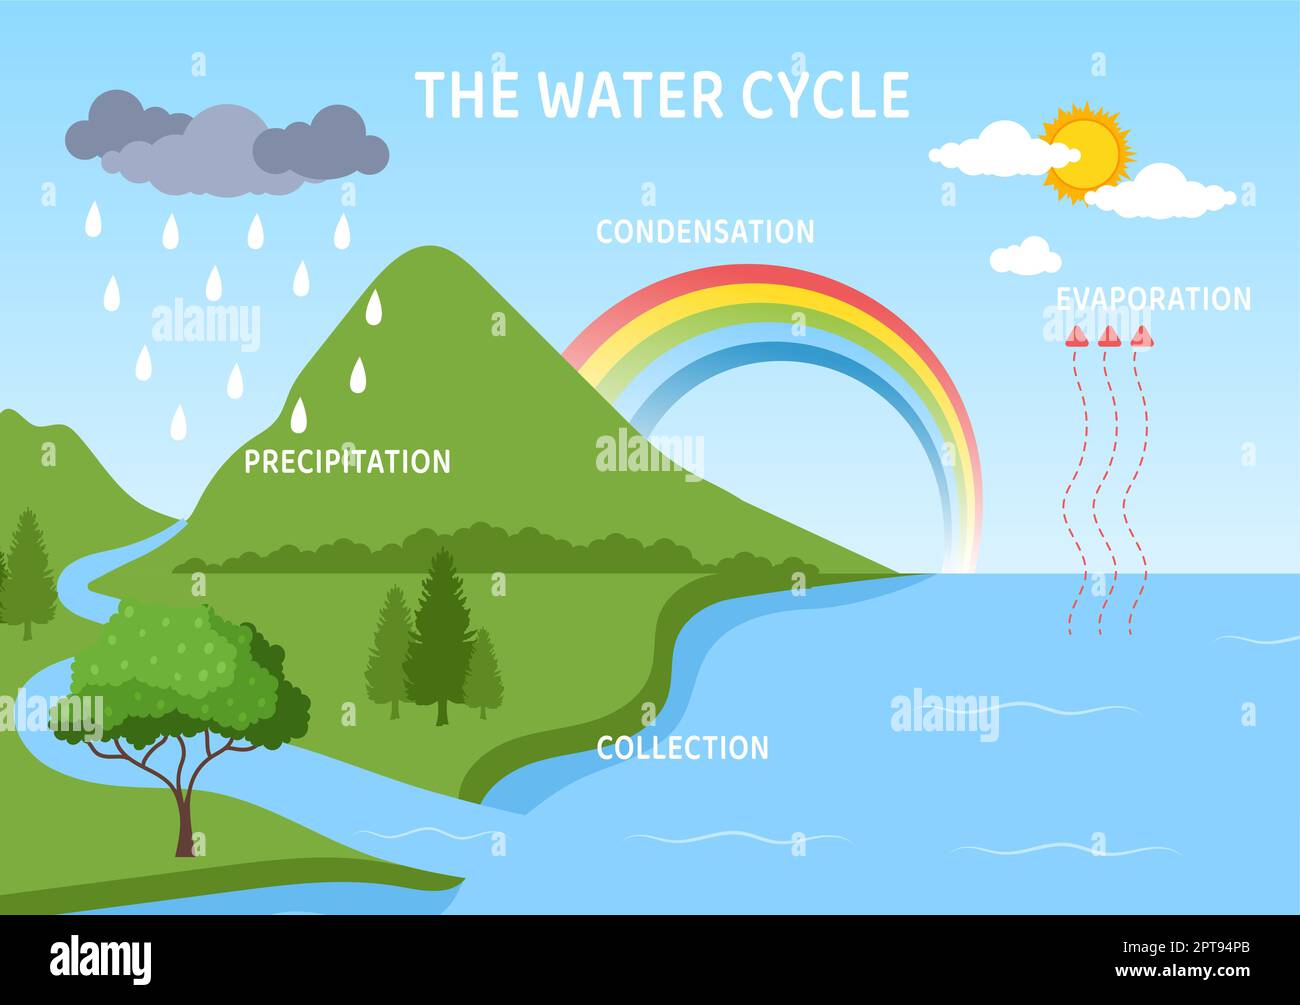 Water Cycle of Evaporation, Condensation, Precipitation to Collection in  Earth natural environment on Flat Cartoon Hand Drawn Template Illustration  Stock Photo - Alamy